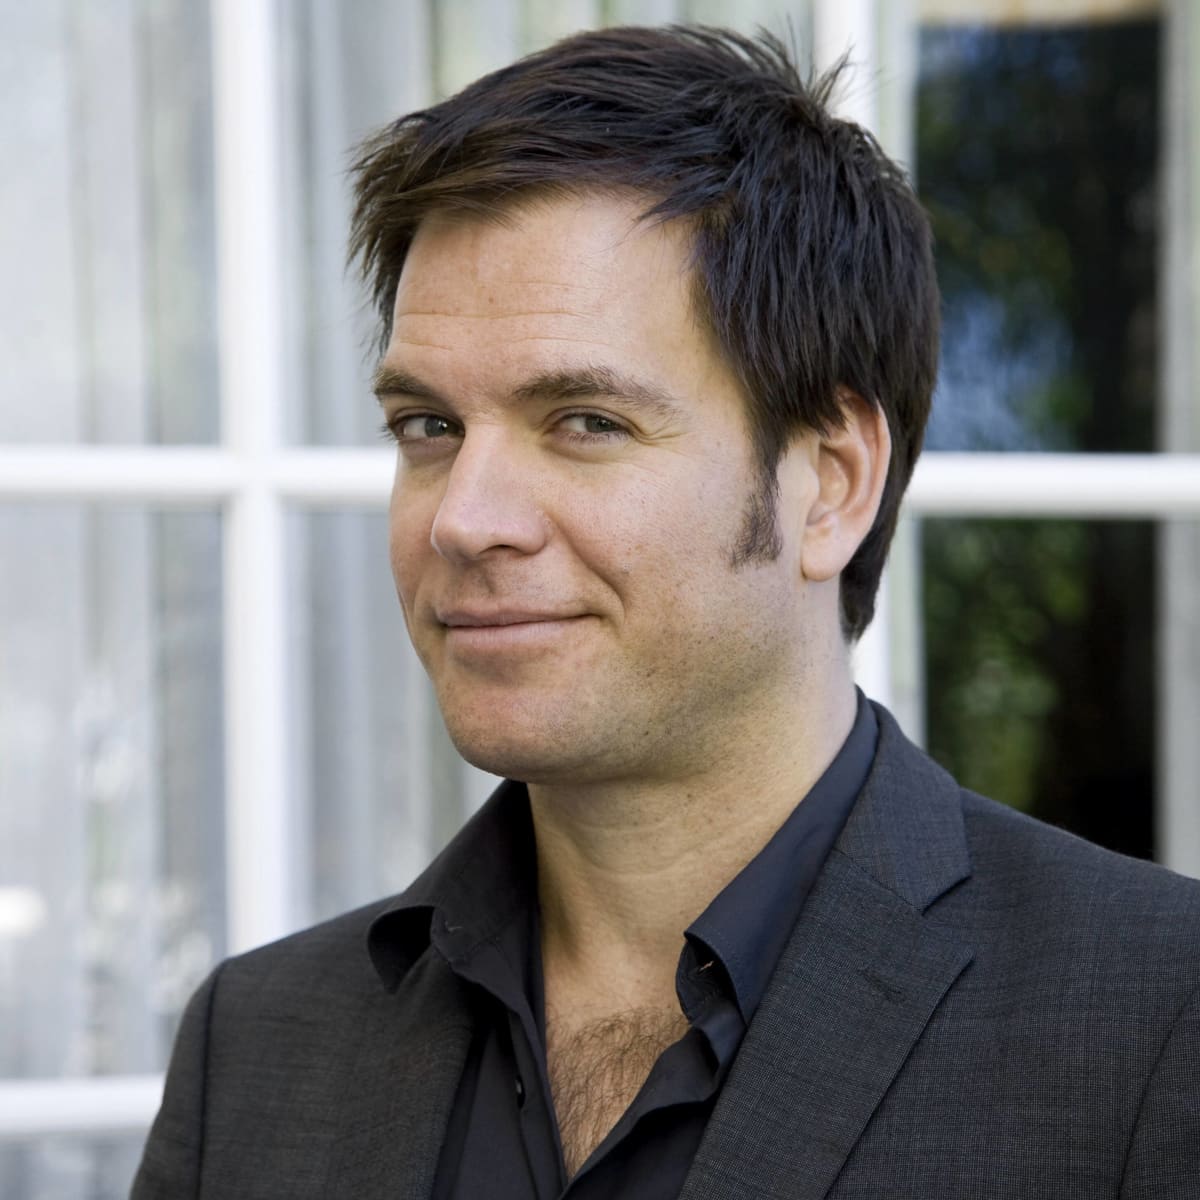 NCIS': This Was Michael Weatherly's Time As Tony